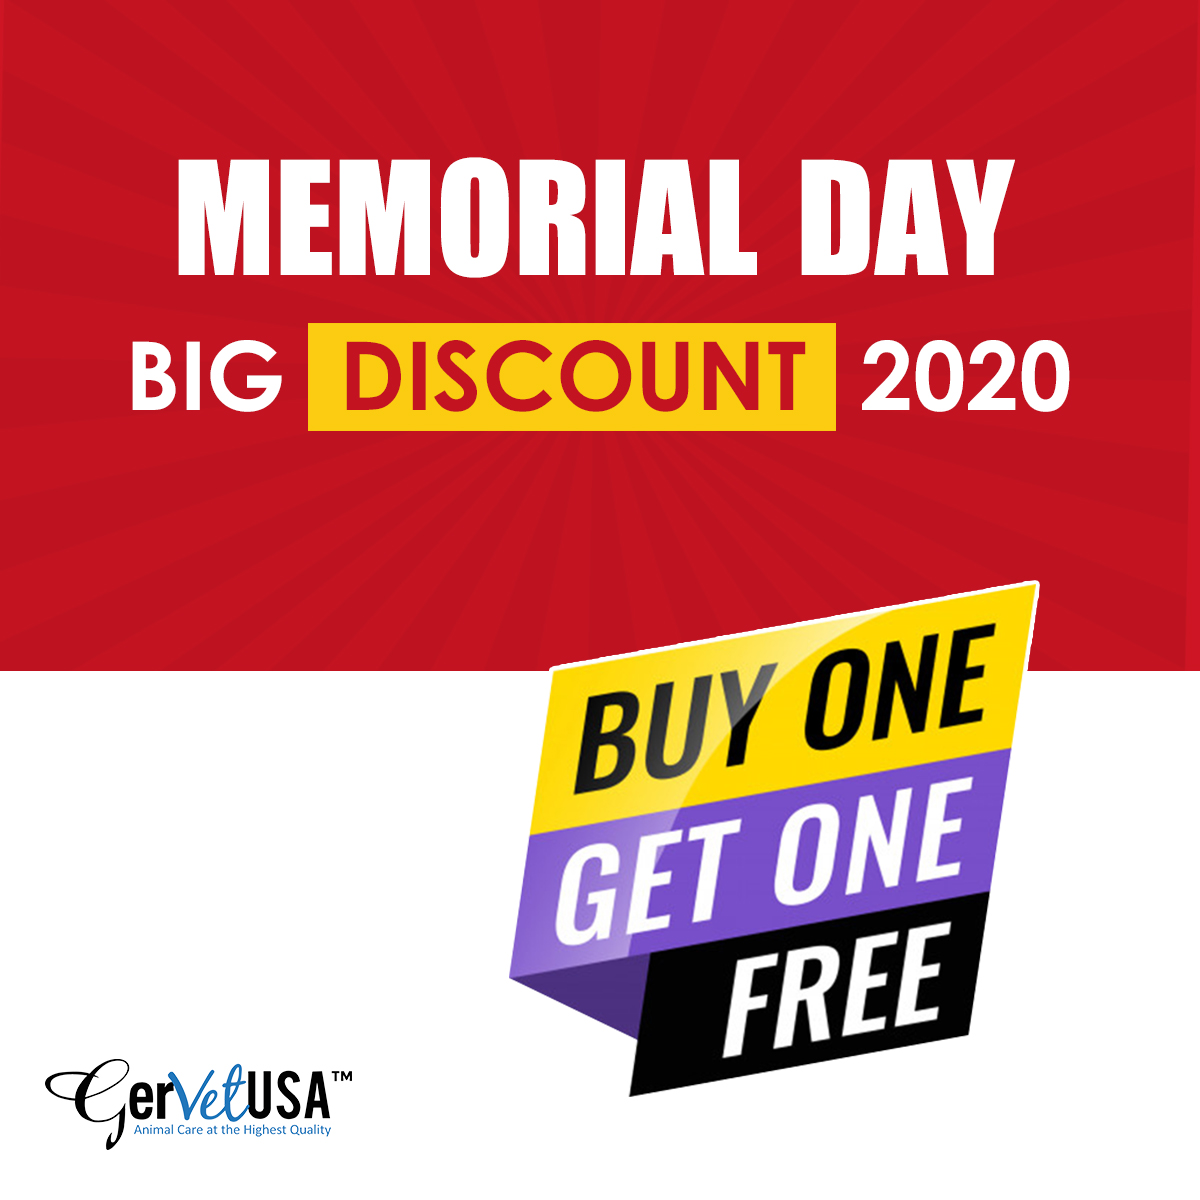 Memorial Day BIG Discount 2020: BUY ONE GET ONE FREE on Surgical Scissors